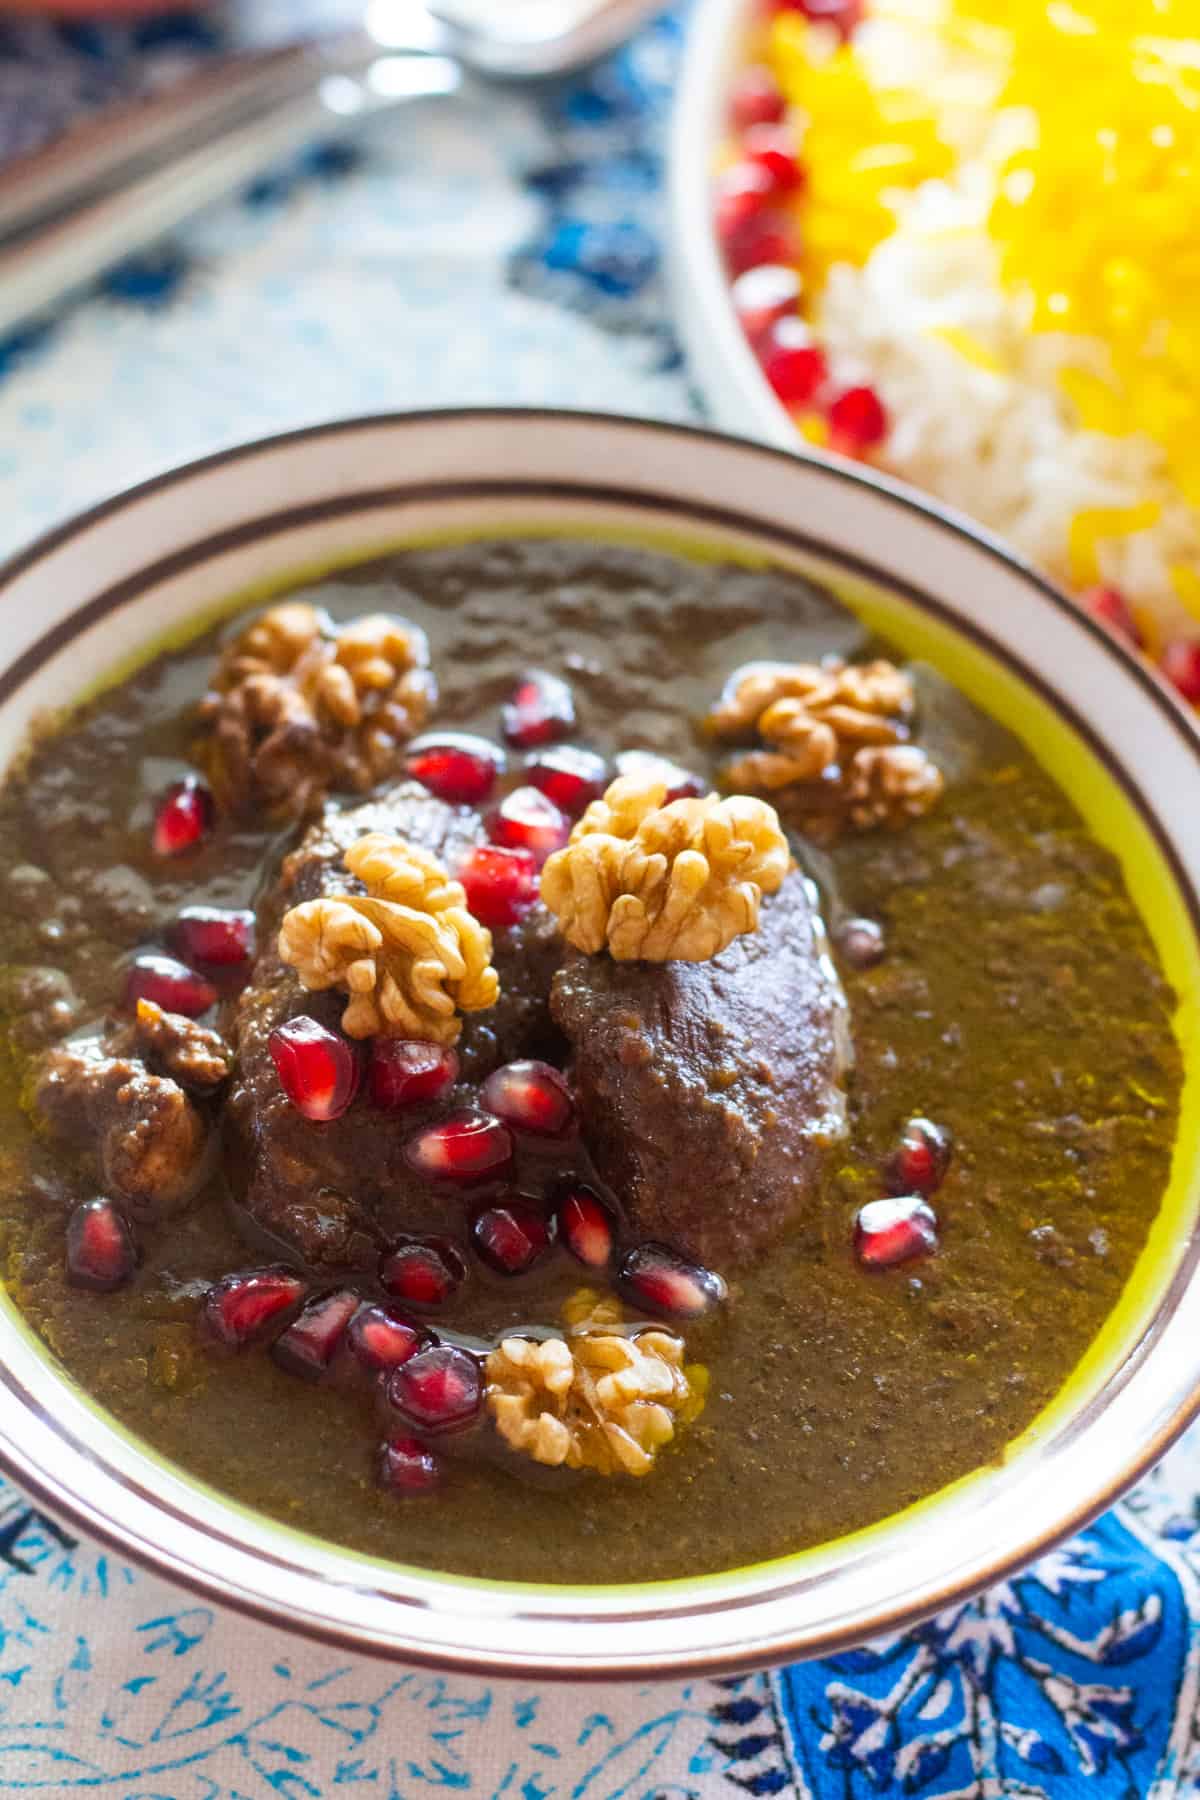 Fesenjan is a traditional Persian pomegranate and walnut chicken stew. It's sweet and sour with a rich nutty flavor and served over rice. The chicken is cooked in a rich walnut and pomegranate sauce until tender, making this a luscious and delicious meal. 